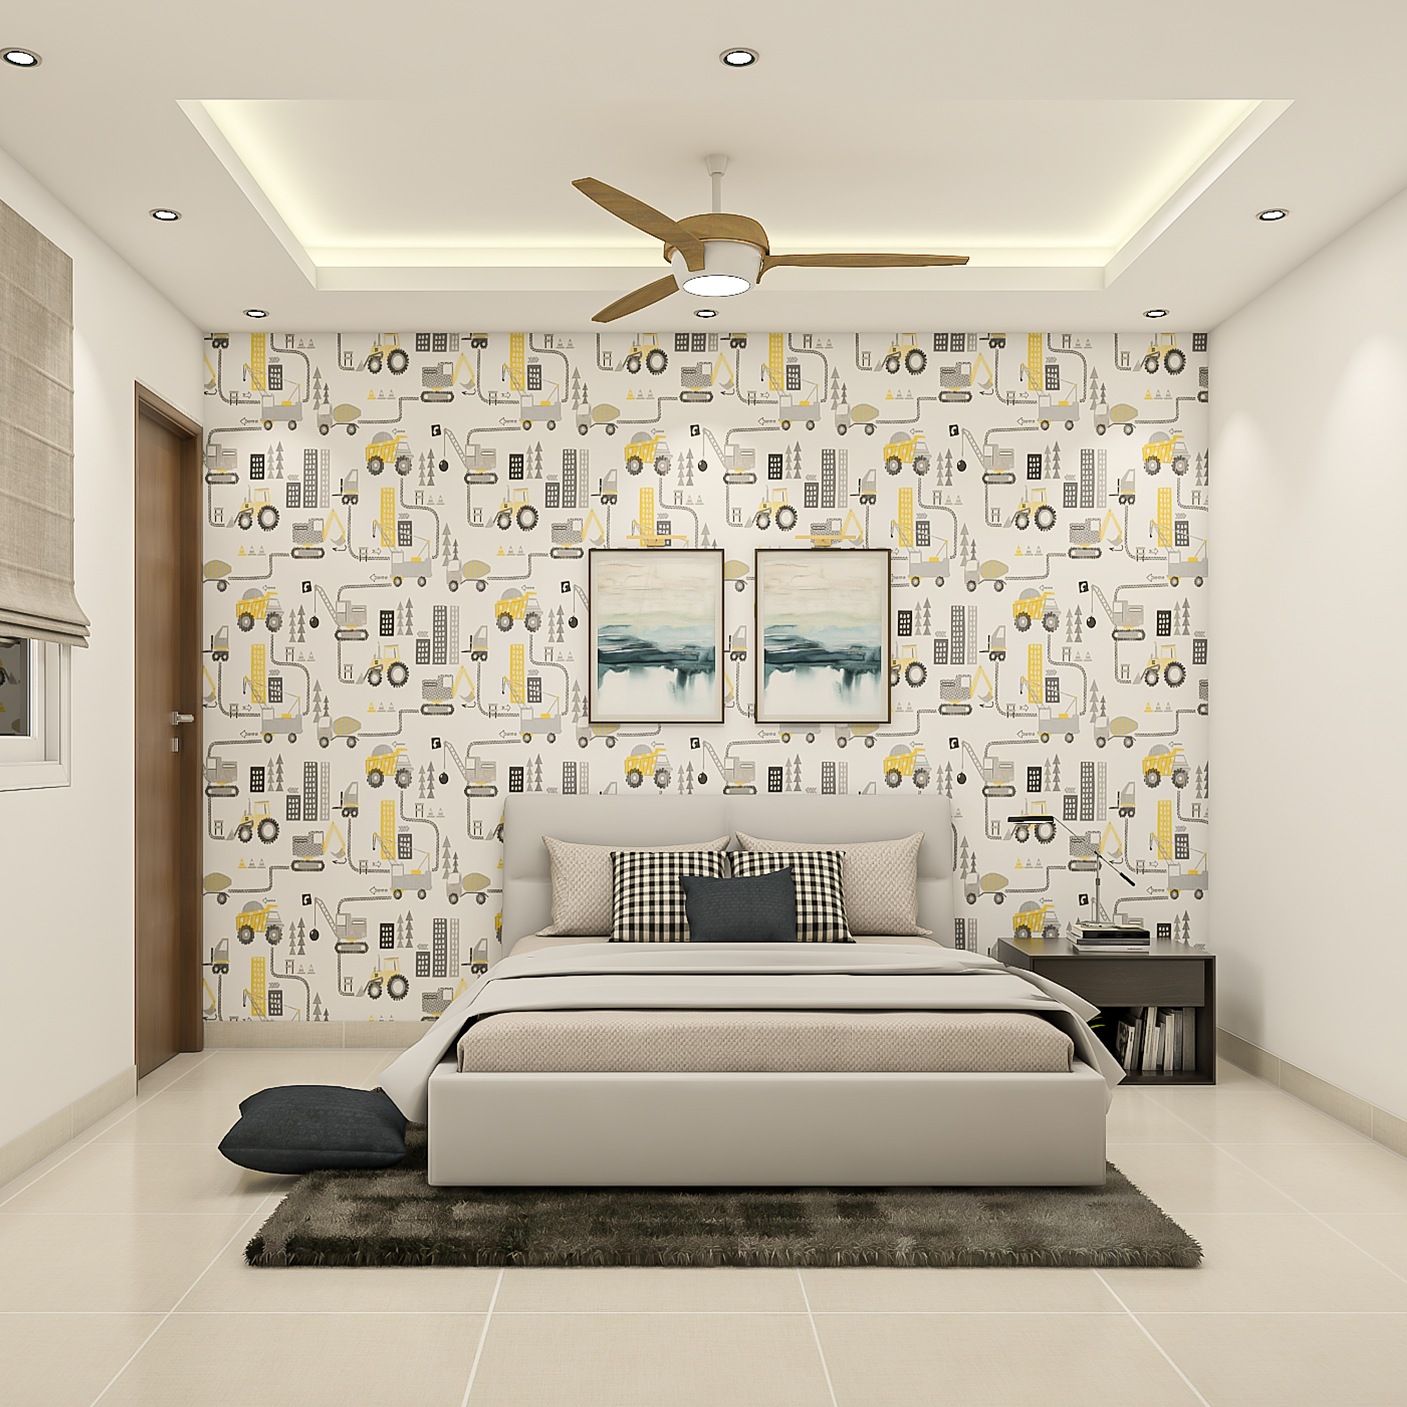 Contemporary Kid's Room Design With Wallpaper